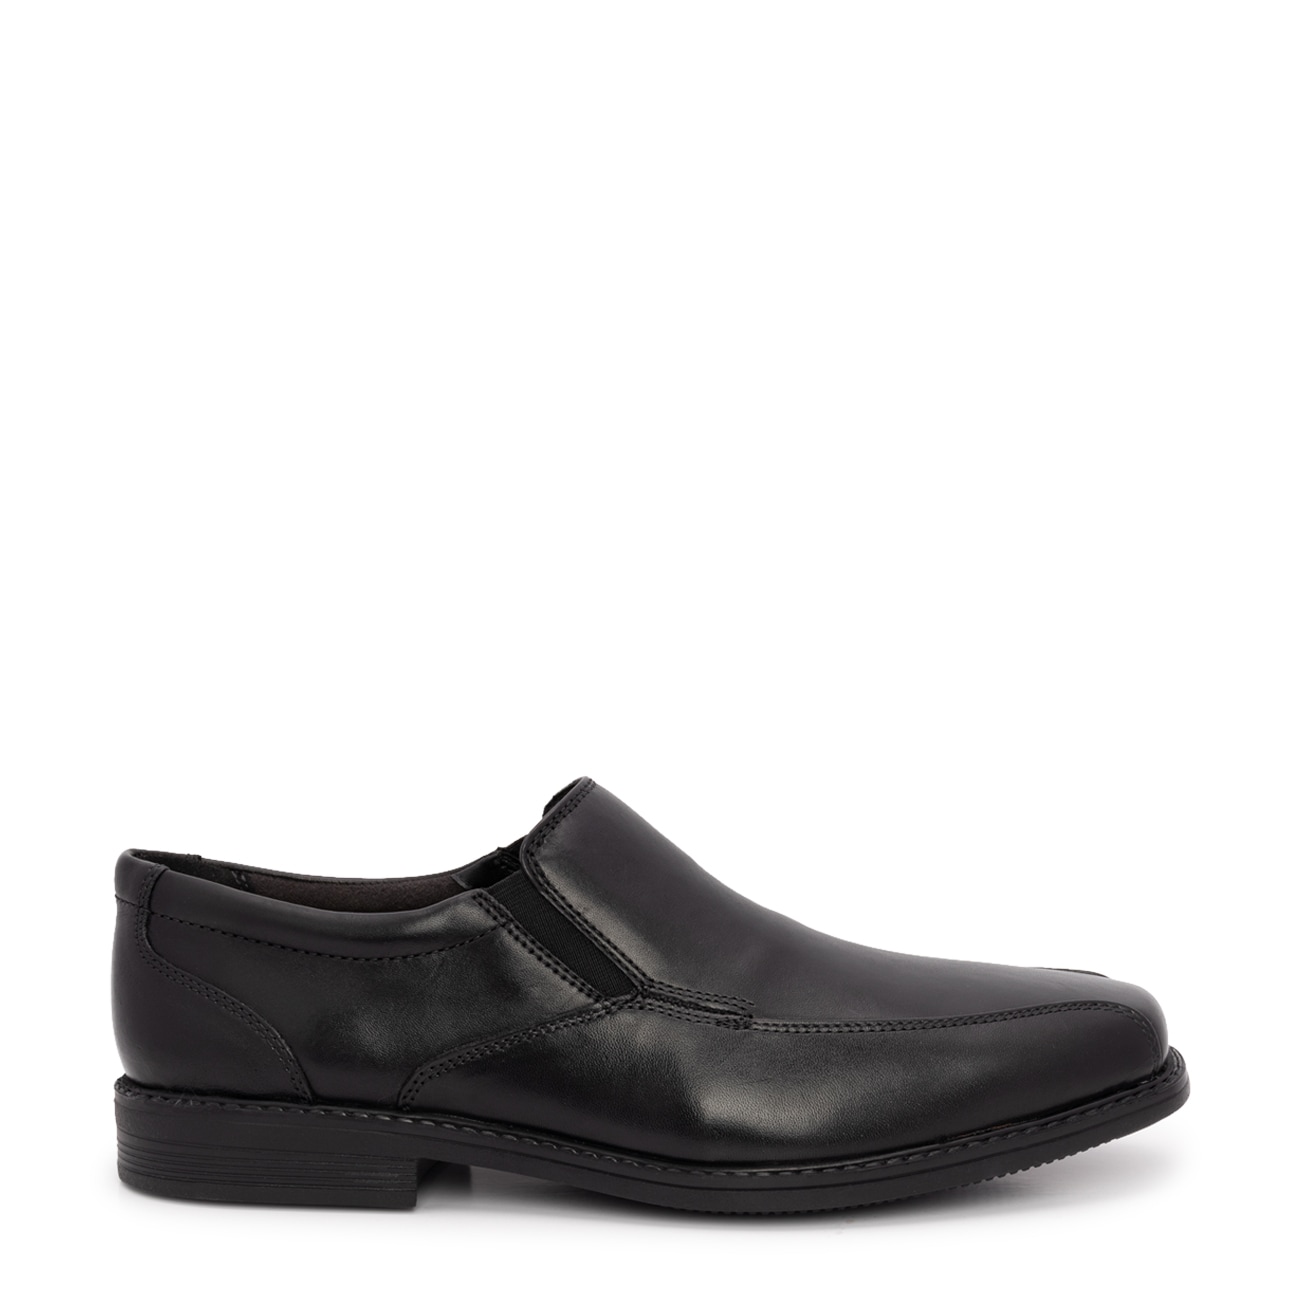 Clarks Men's Bolton Free Wide Width Loafer | The Shoe Company